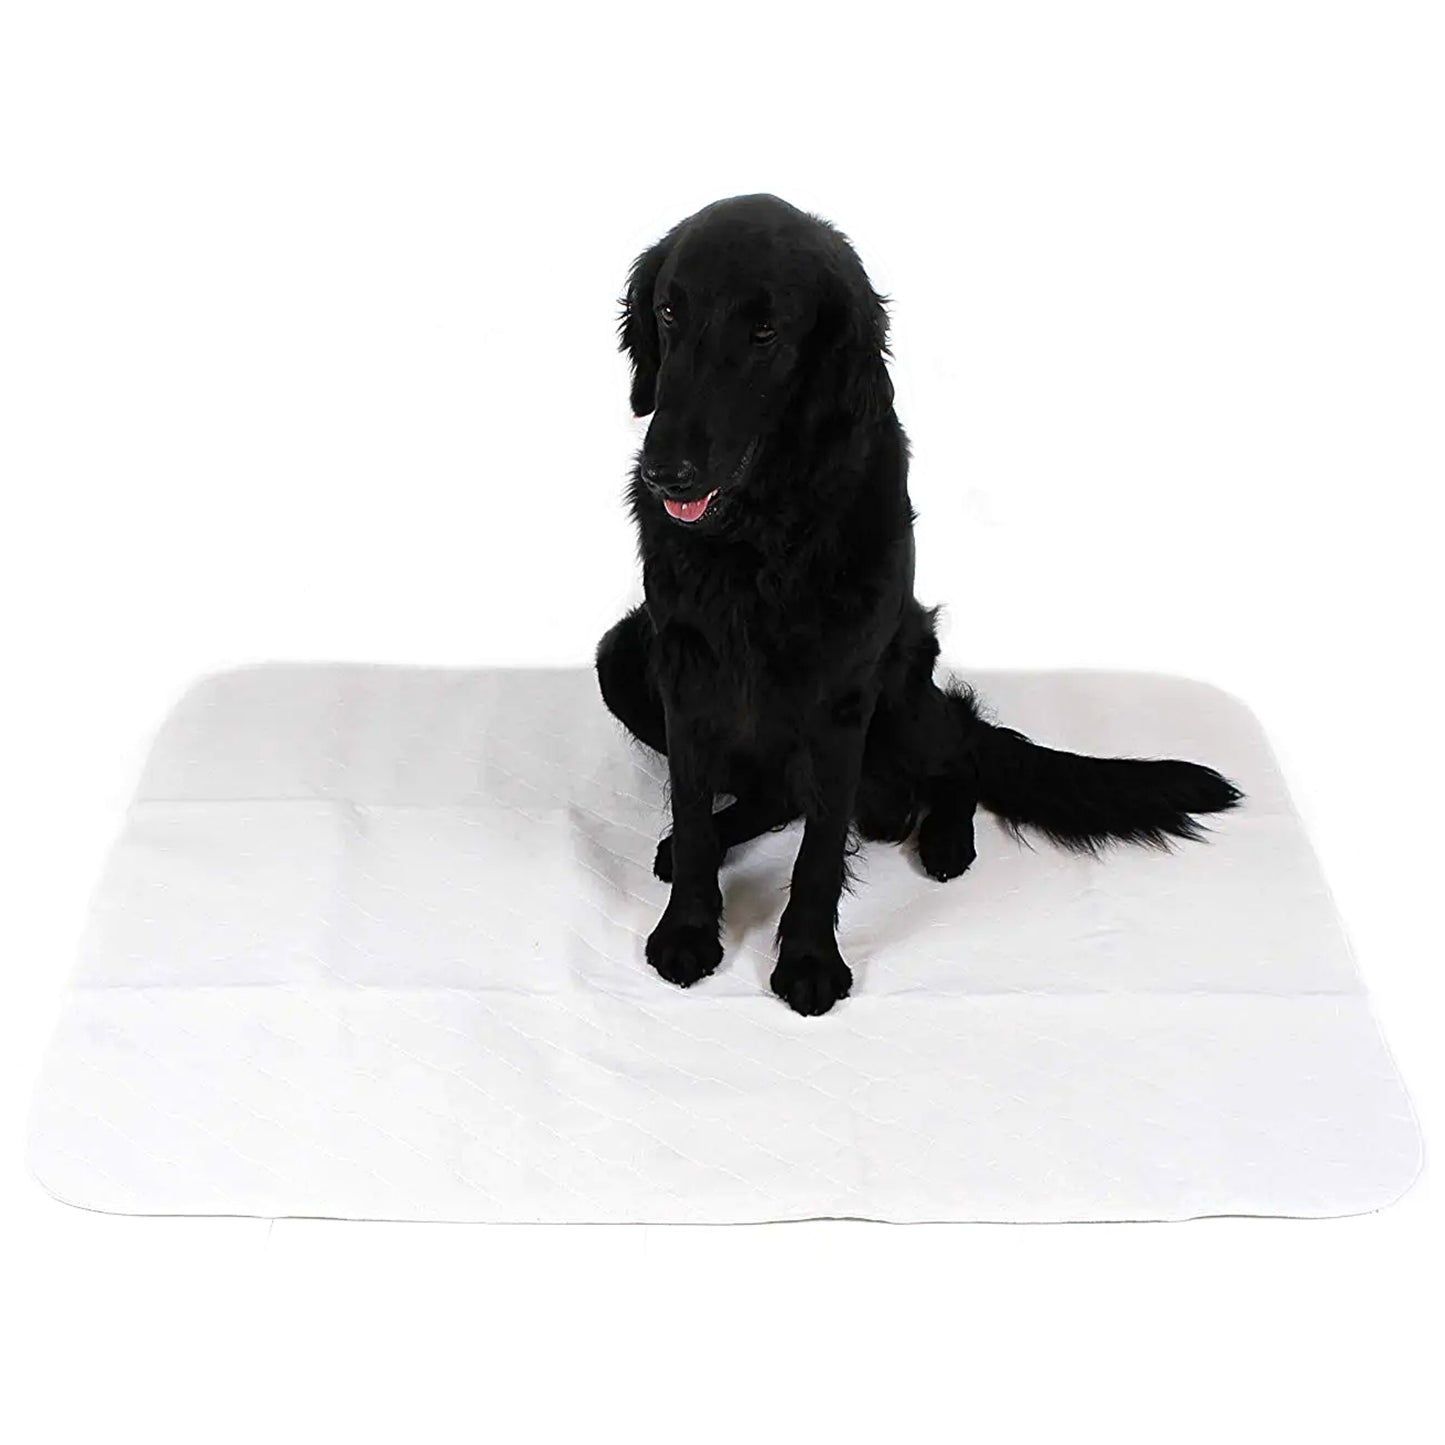 Midlee Reusable & Washable Dog Training Absorbent Pee Pads Pack of 3